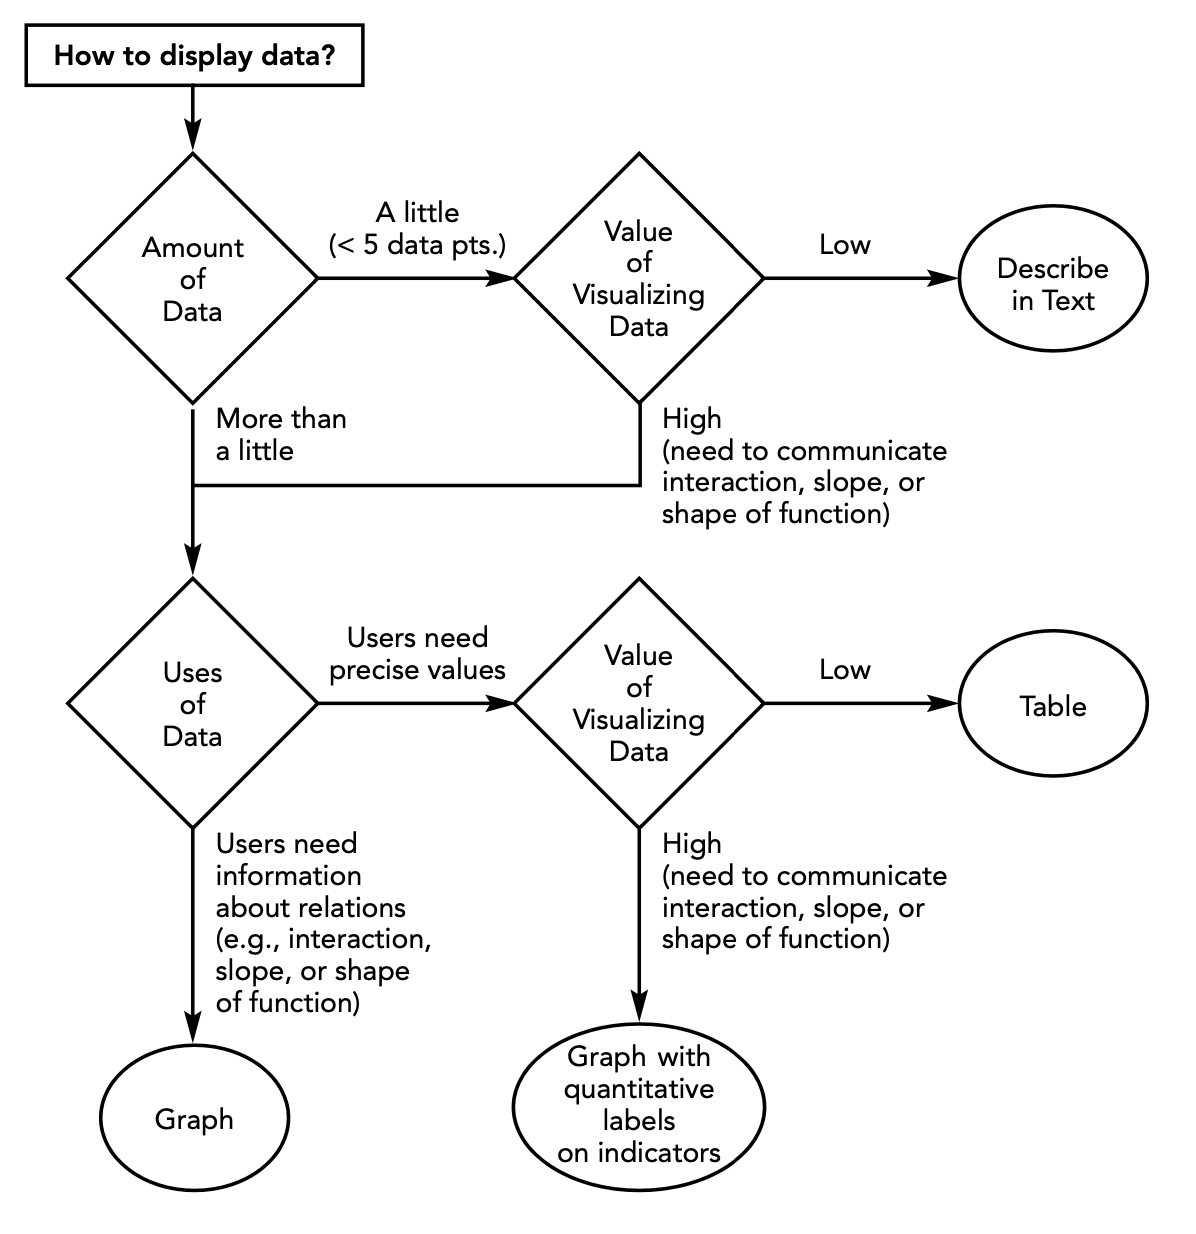 a flowchart for deciding how to display data, which branches based on the amount and usage of the data and the value of visualizing it. Endpoints include text descriptions, tables, and graphs